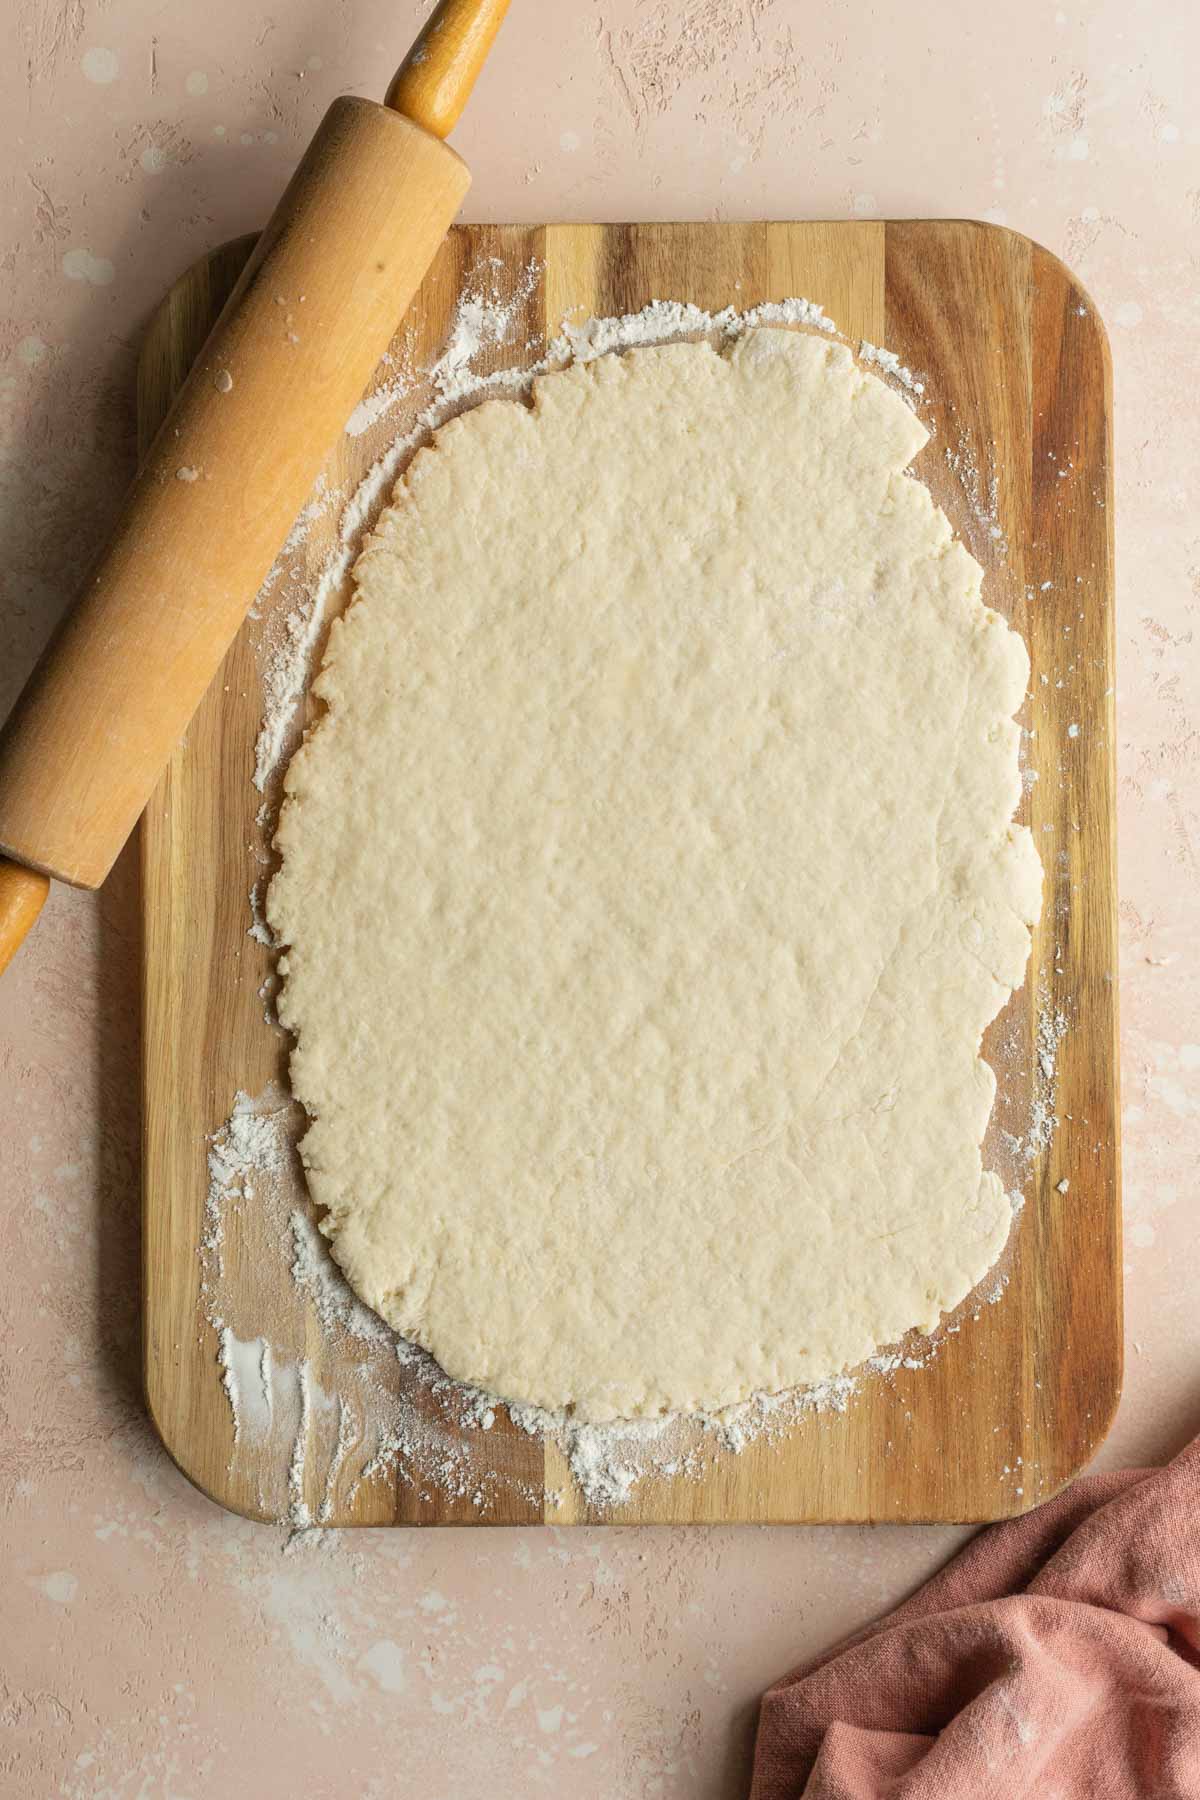 Rolled out dough on a wooden board next to a rolling pin.